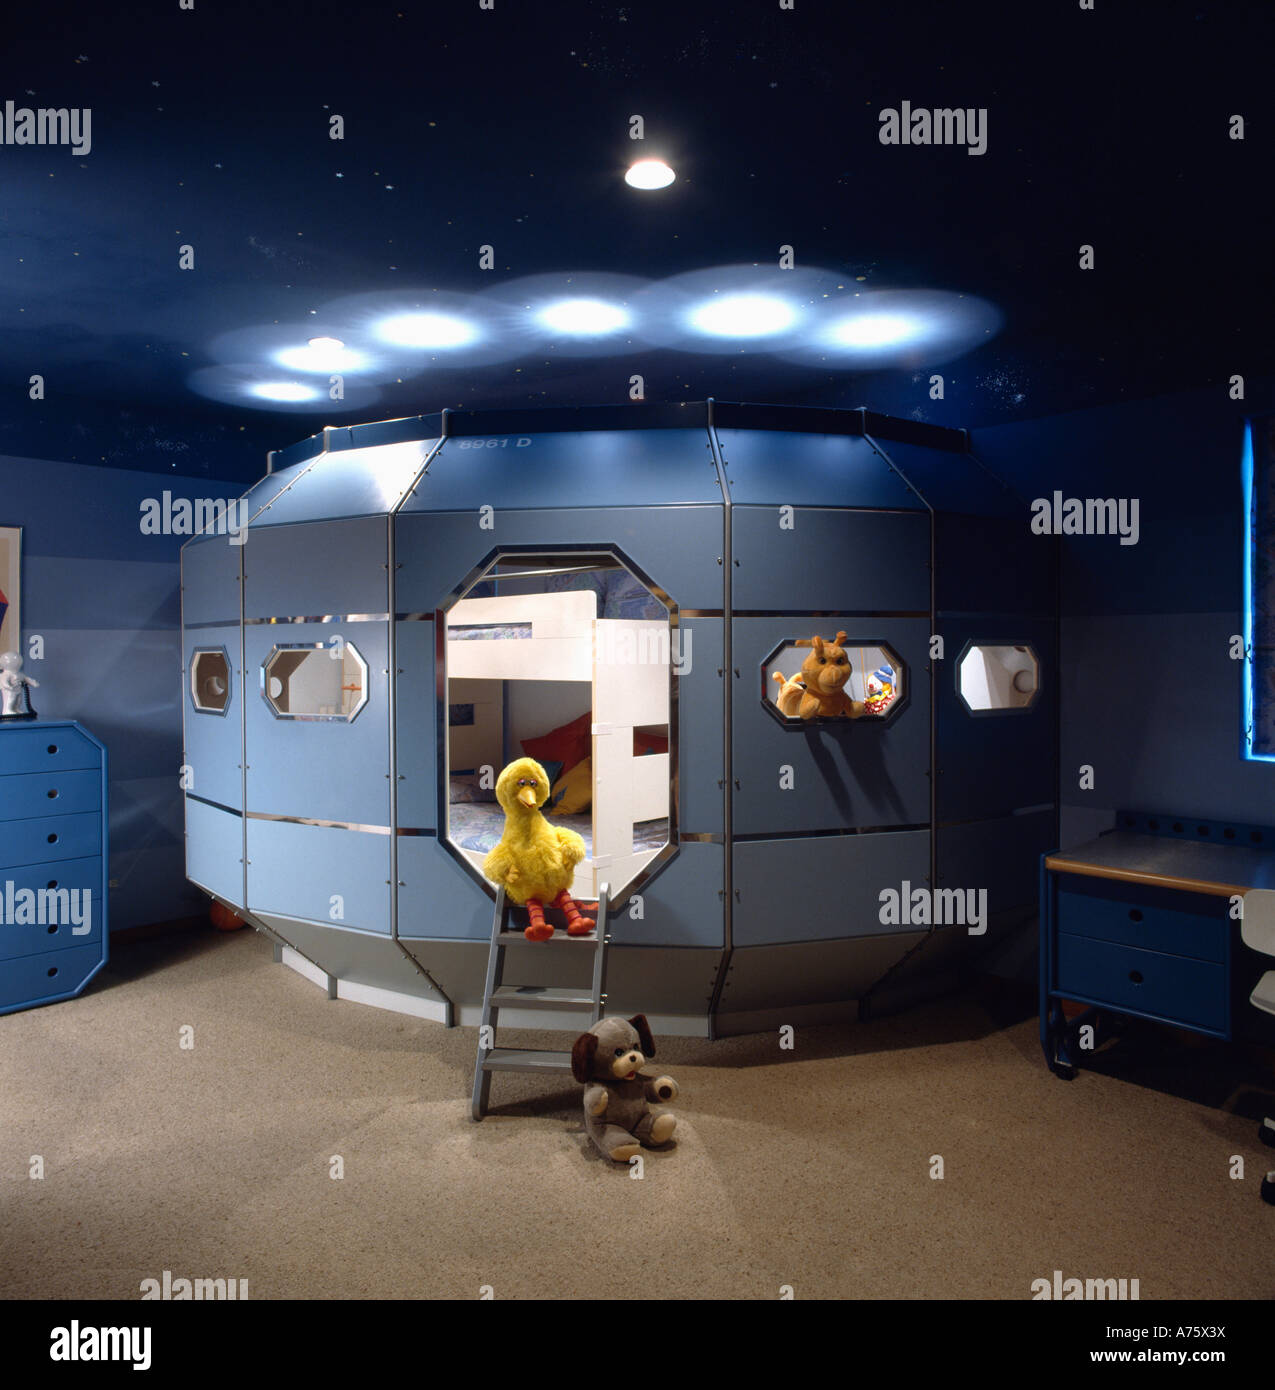 Eighties children's bedroom with space capsule bed and toy duck Stock Photo